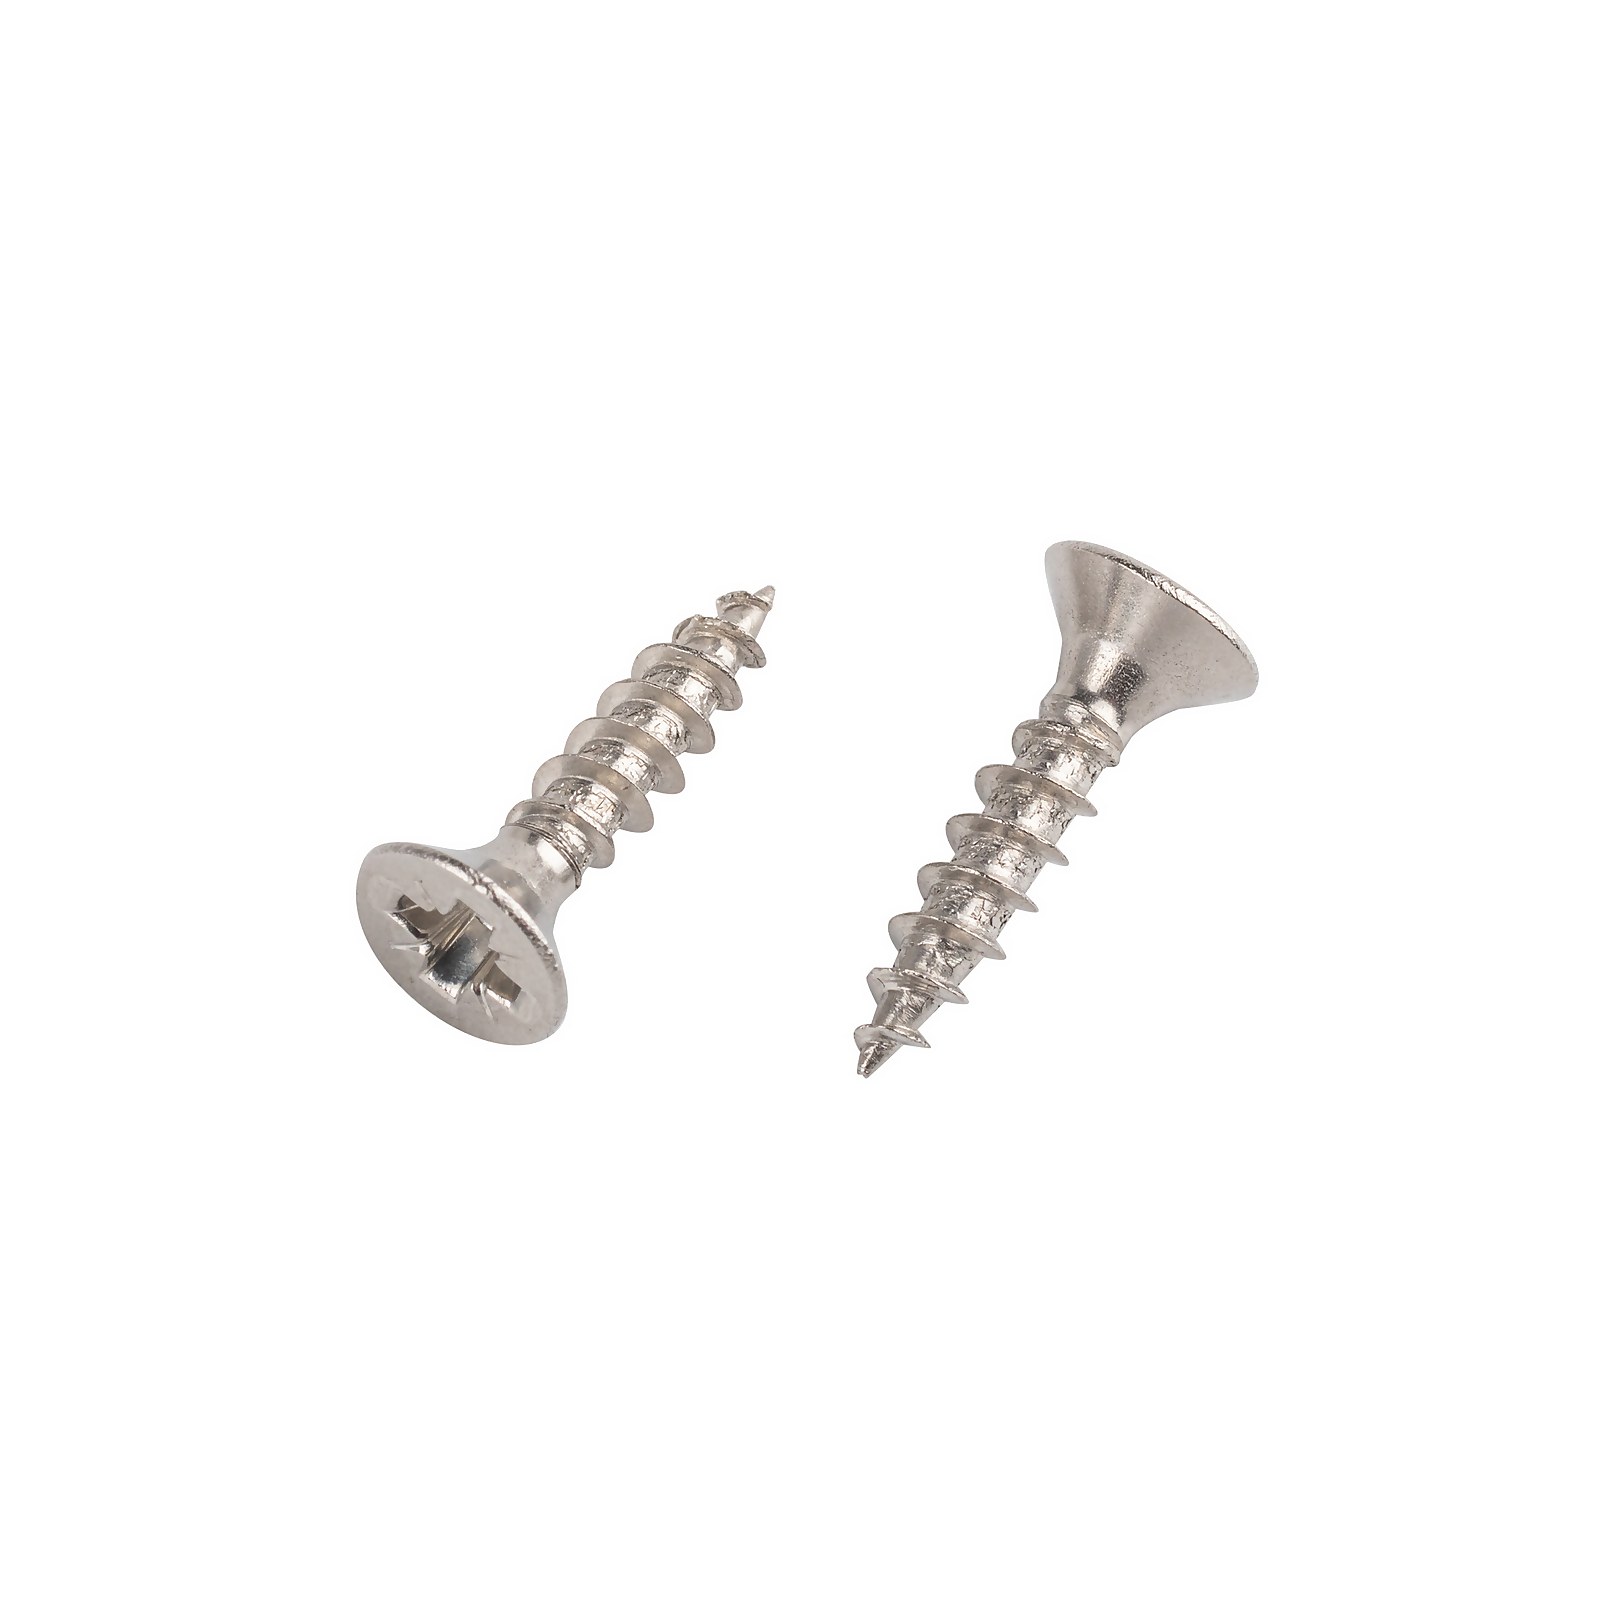 Photo of Homebase Stainless Steel Single Thread Screw 3.5 X 16mm 25 Pack